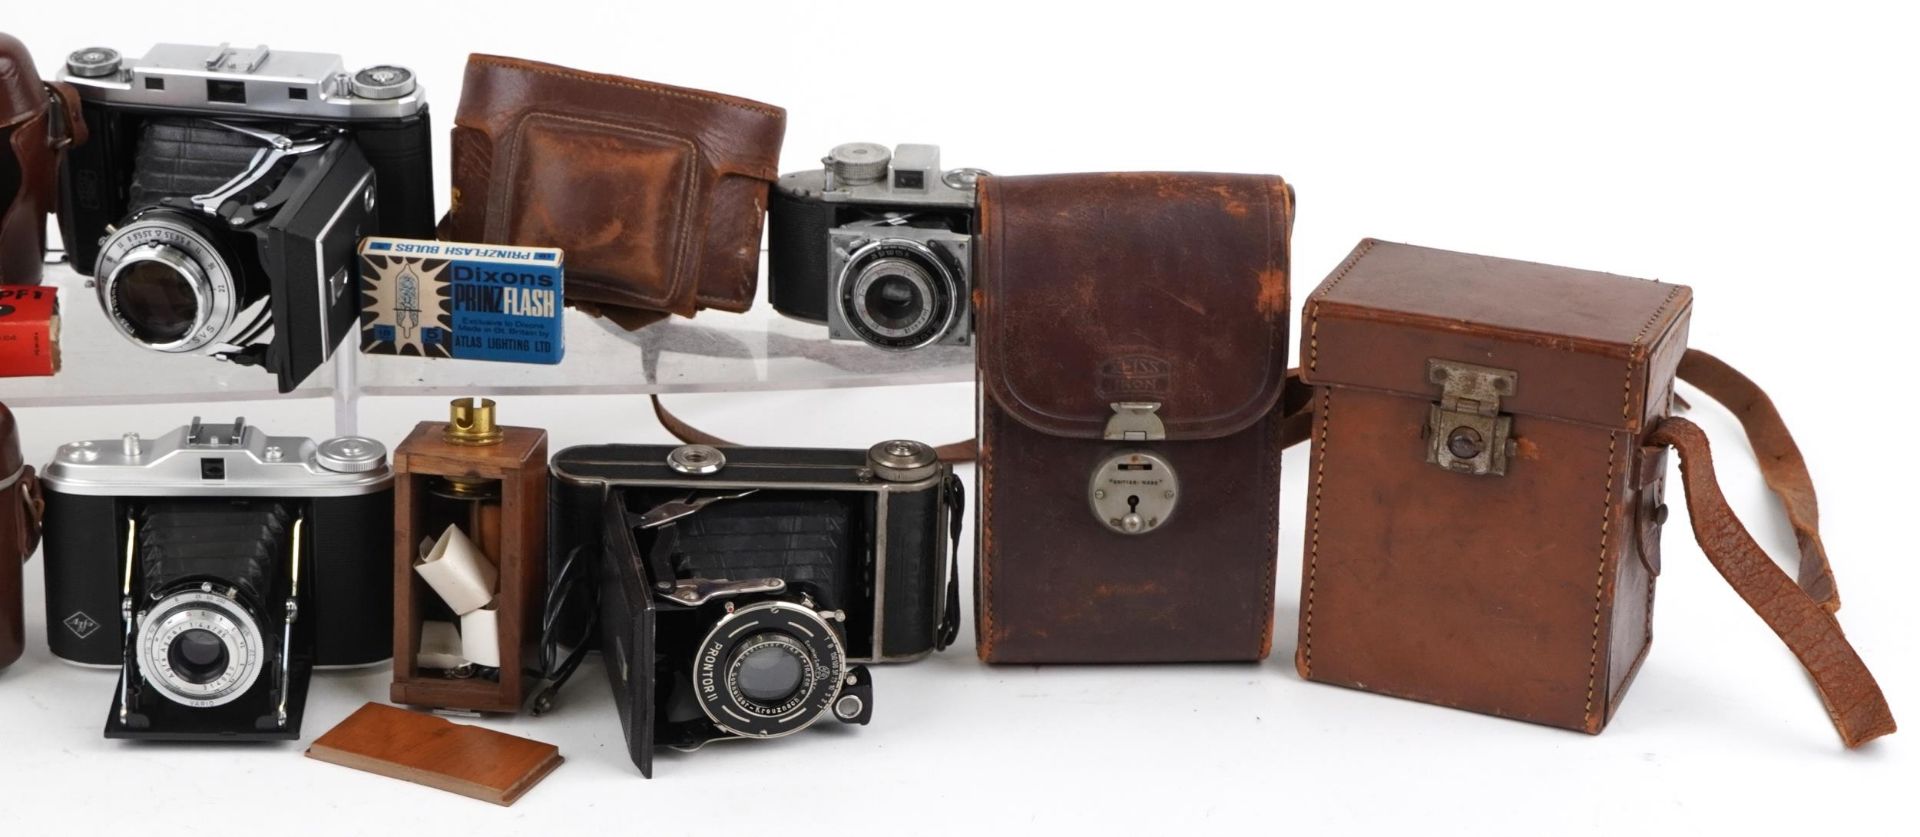 Vintage cameras and accessories including Zeiss Ikon, AGFA Isolette and Voigtlander - Bild 3 aus 3